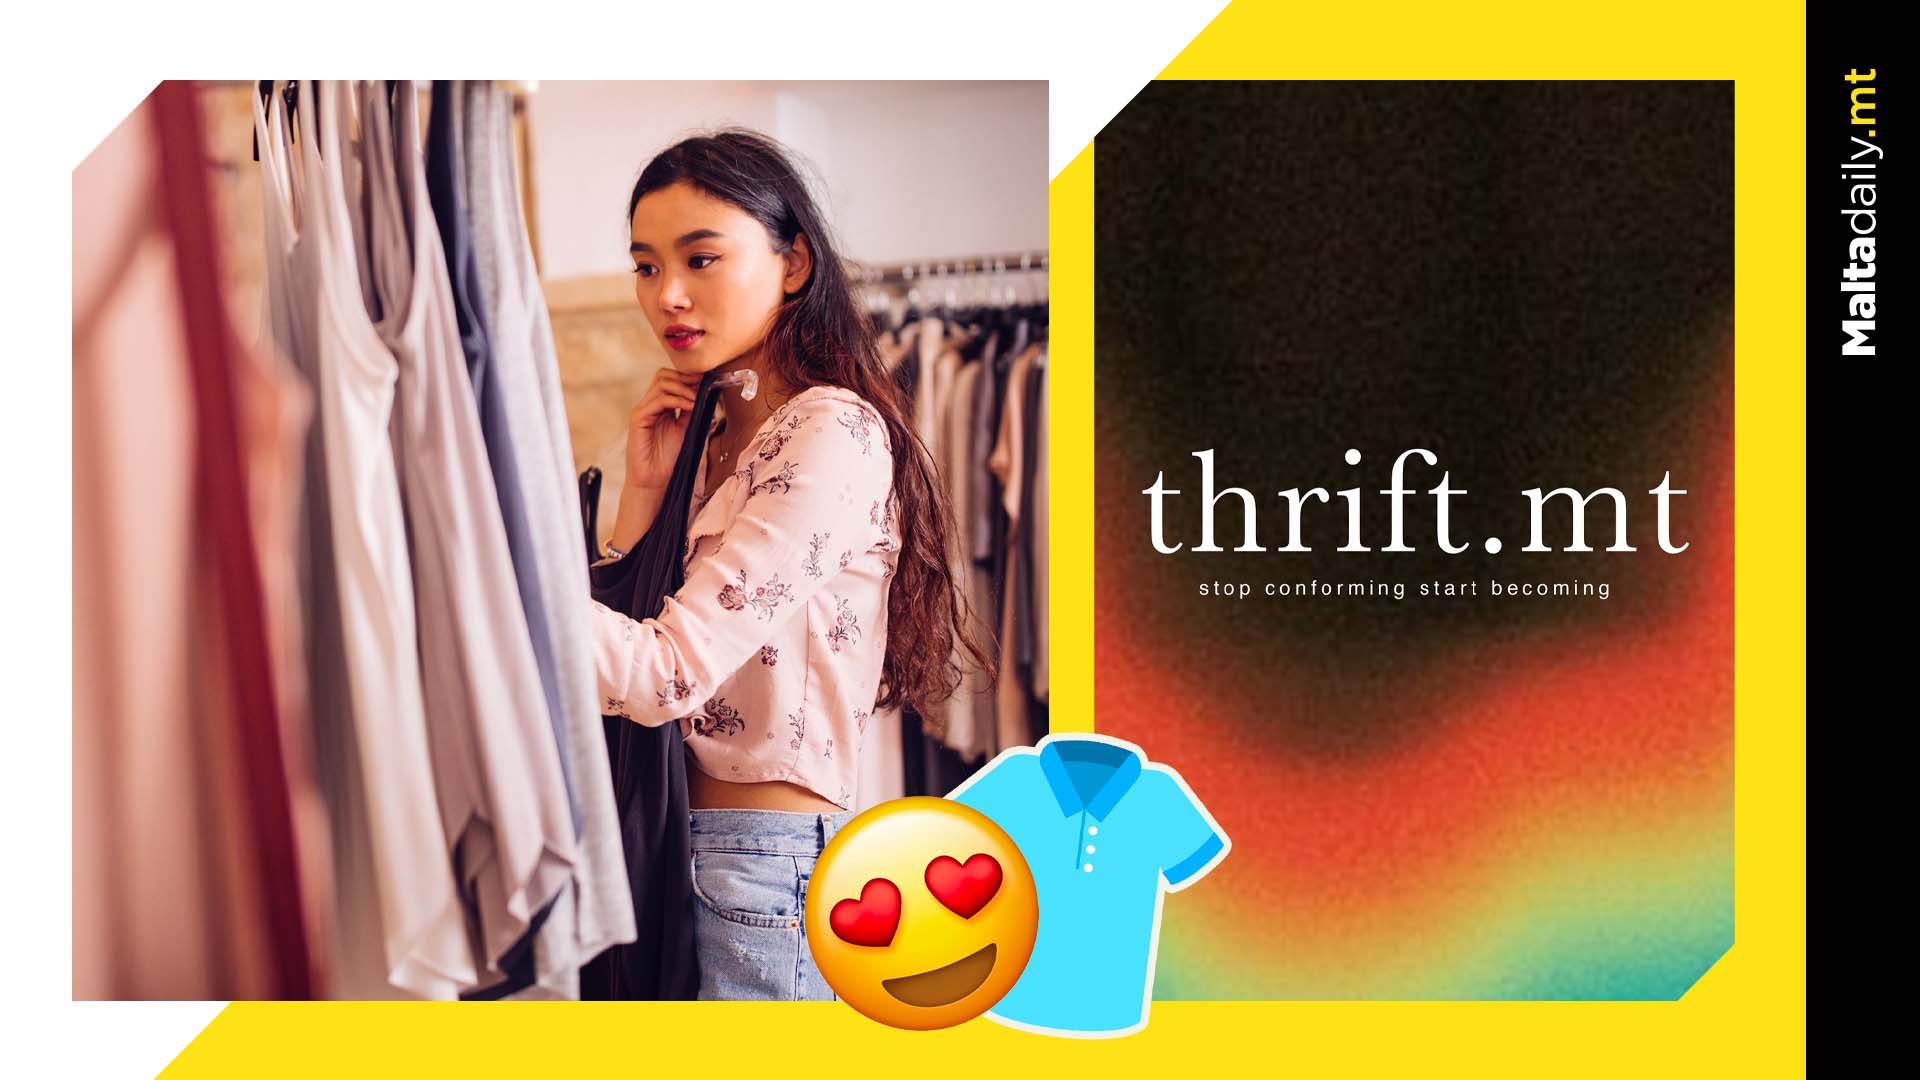 The local thrift brand shifting Malta towards sustainable fashion